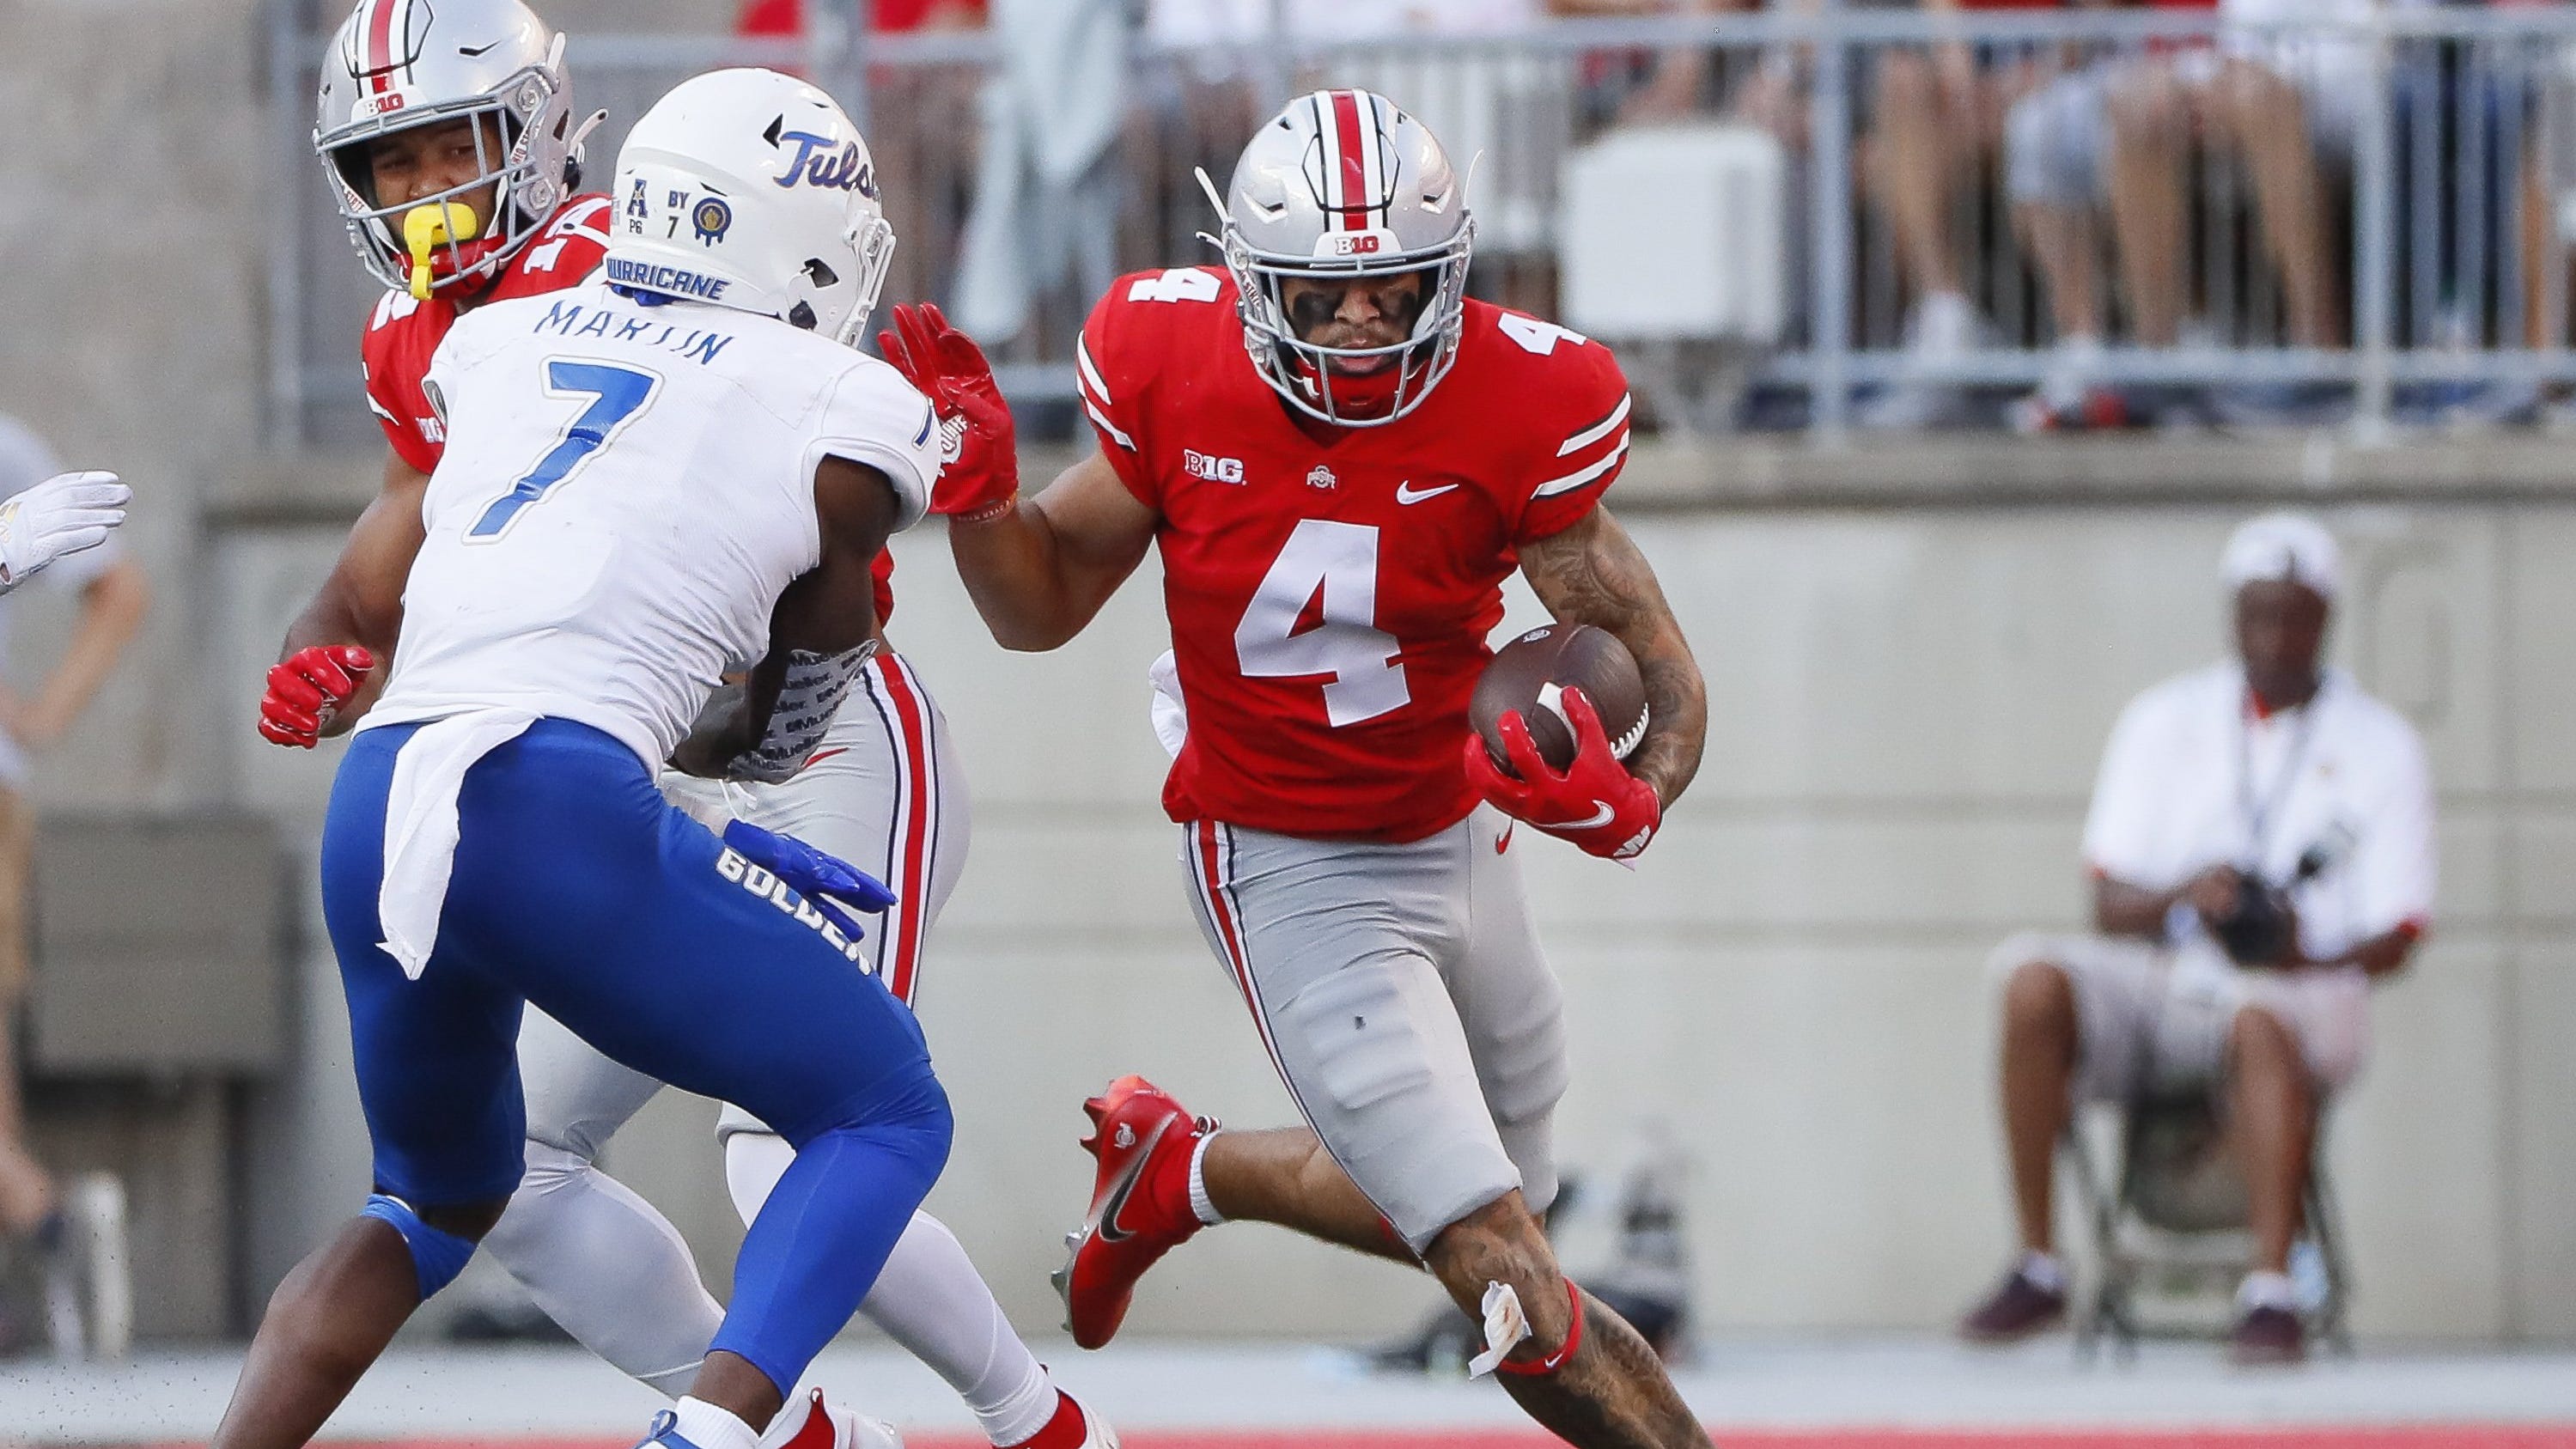  Ohio State football receiver Julian Fleming shakes off shoulder injury scare in scrimmage 